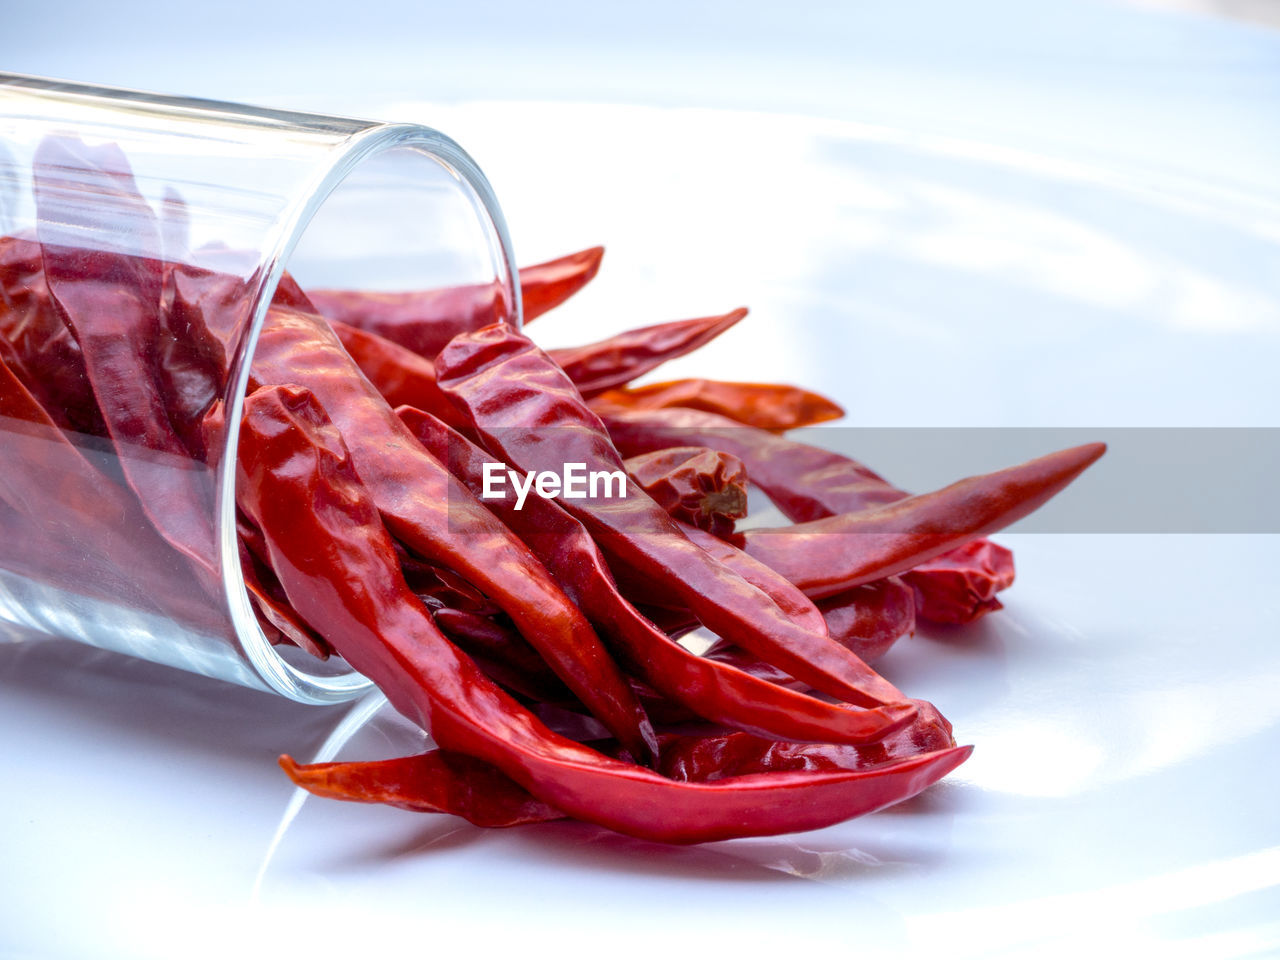 CLOSE-UP OF RED CHILI PEPPERS IN GLASS ON TABLE